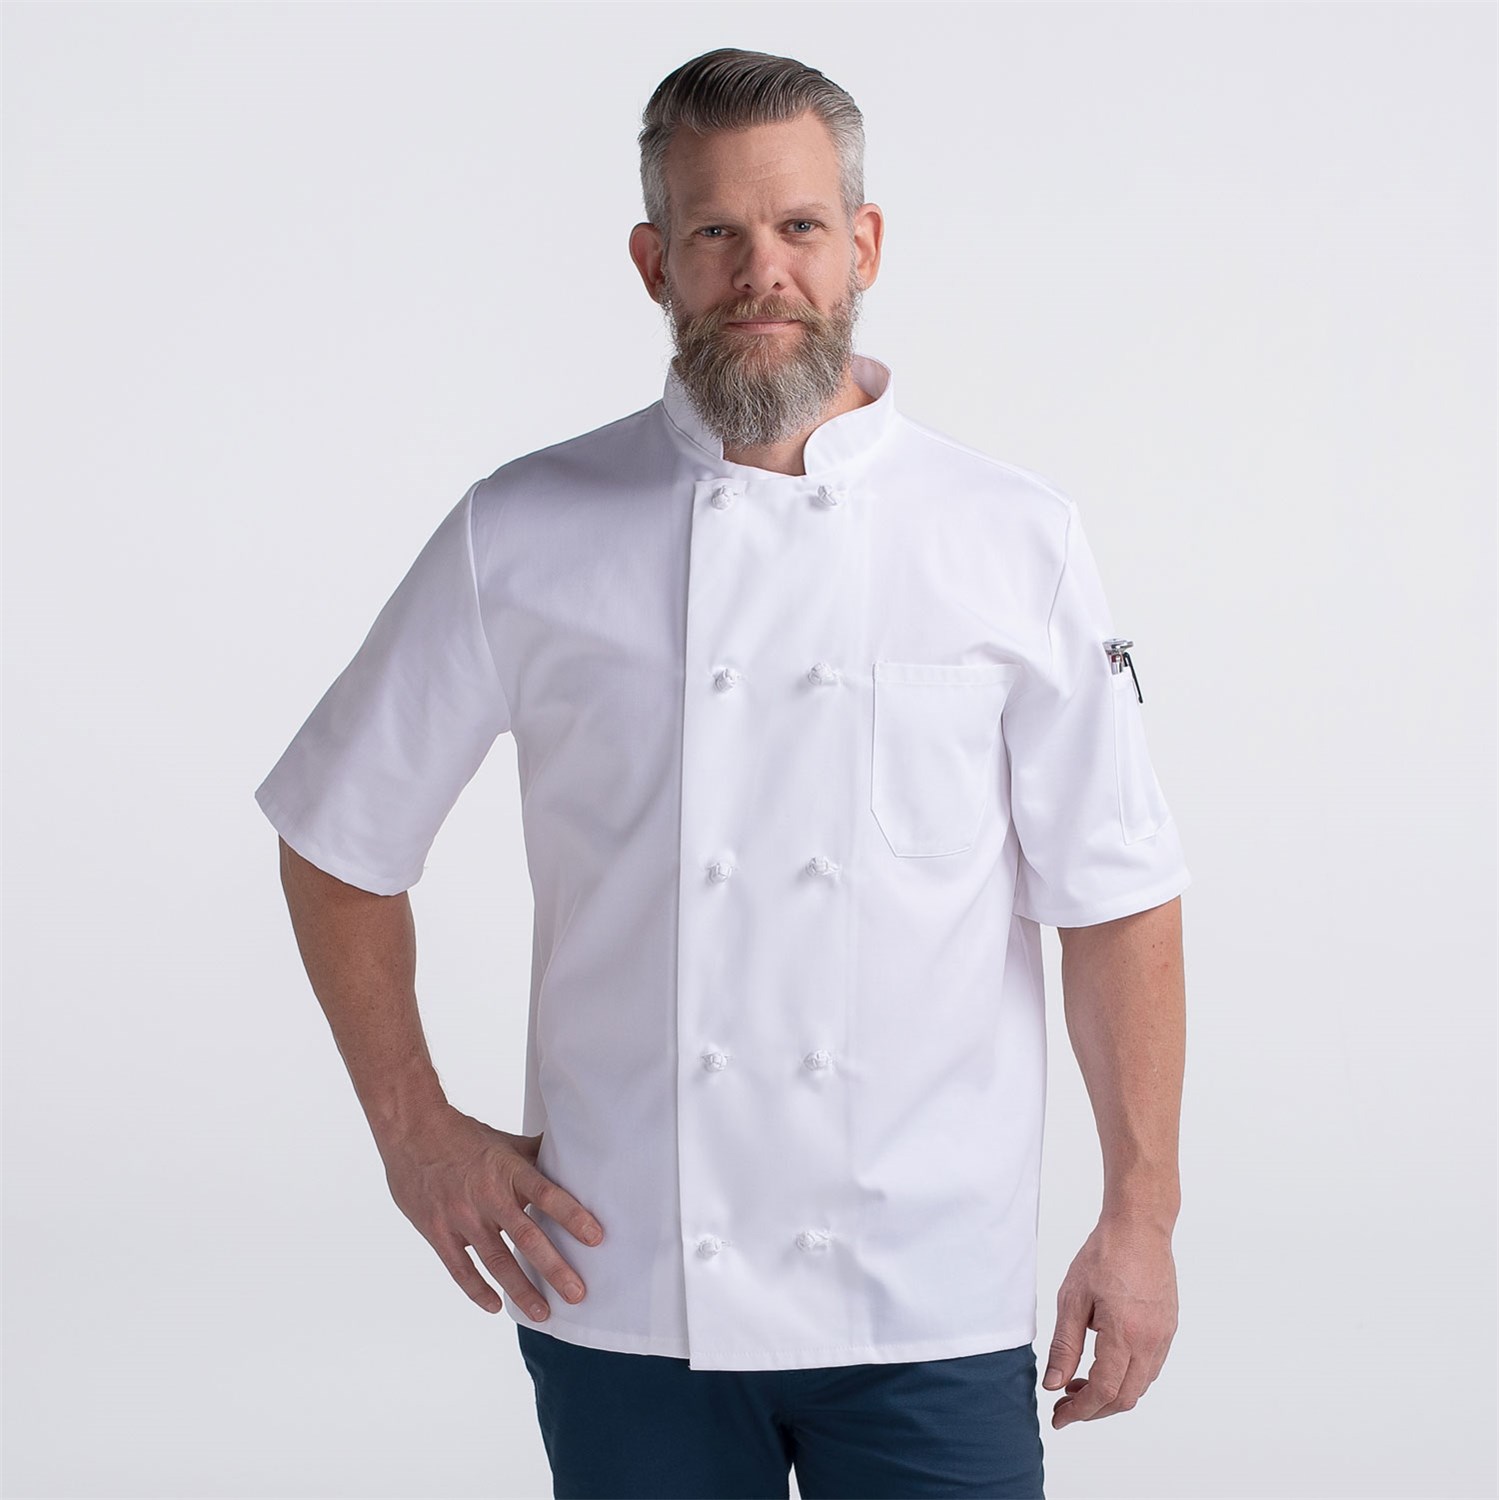 Details about   Unisex Chef Jacket Top Short Sleeve Chefwear Coat Kitchen Baking Frog Button New 